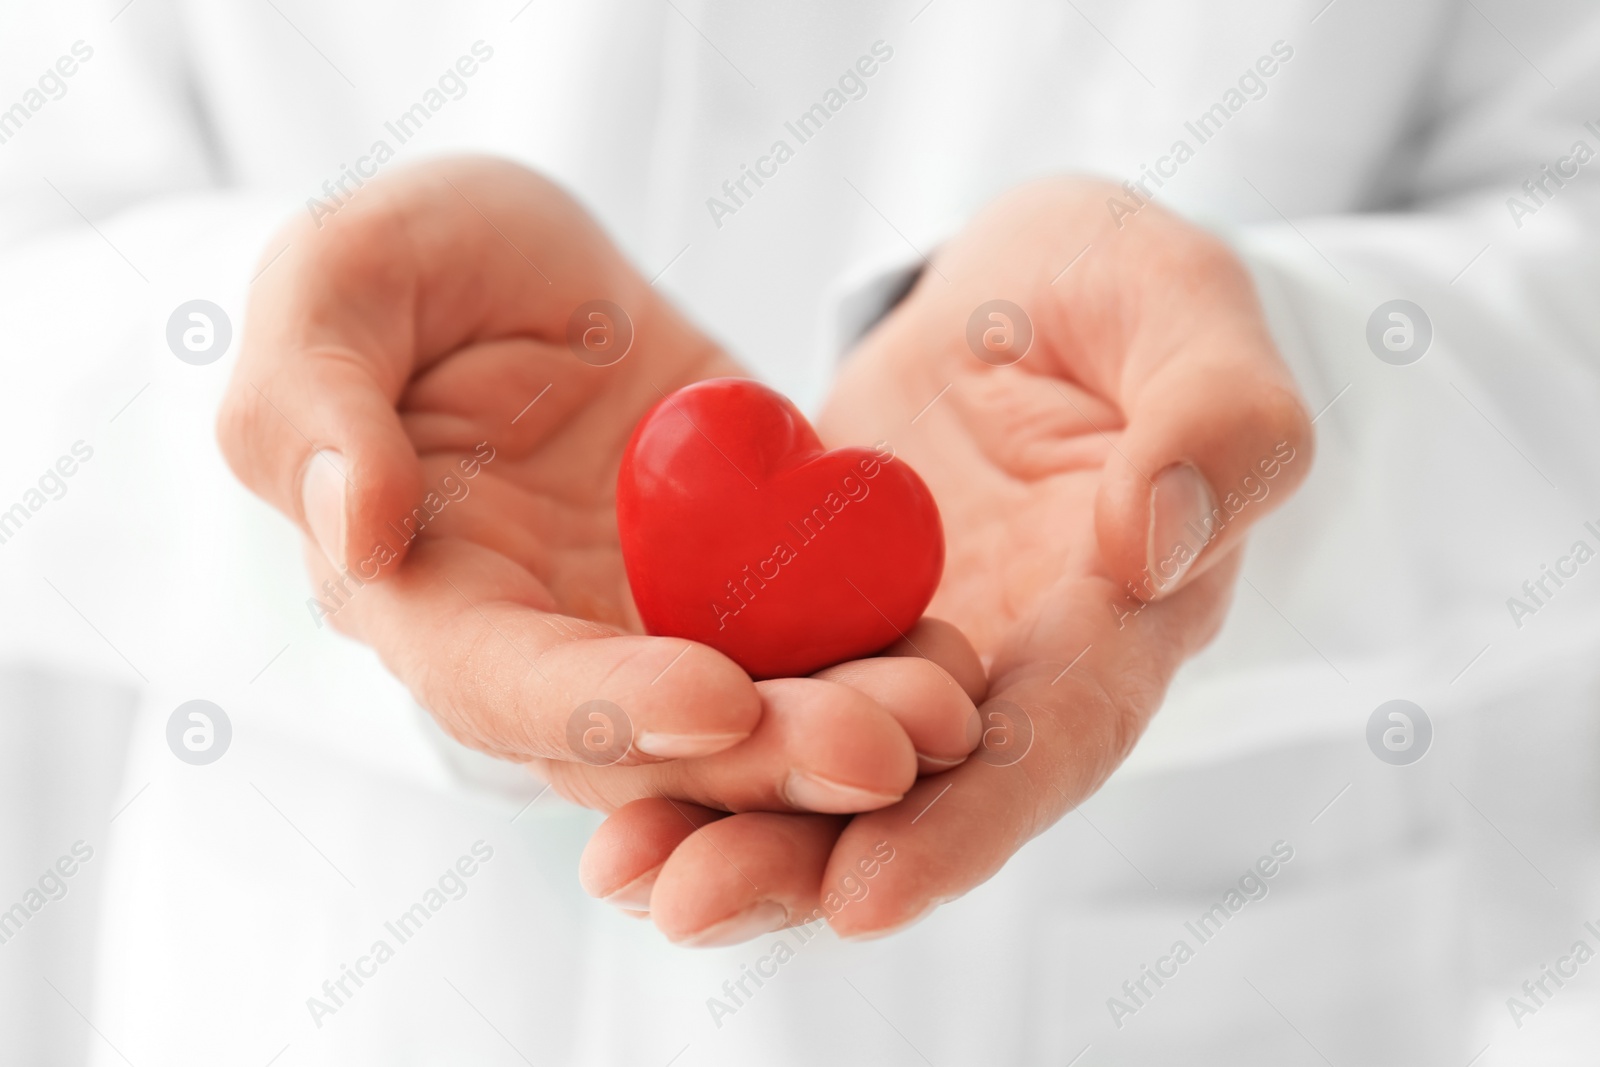 Photo of Doctor holding small red heart, closeup. Heart attack concept